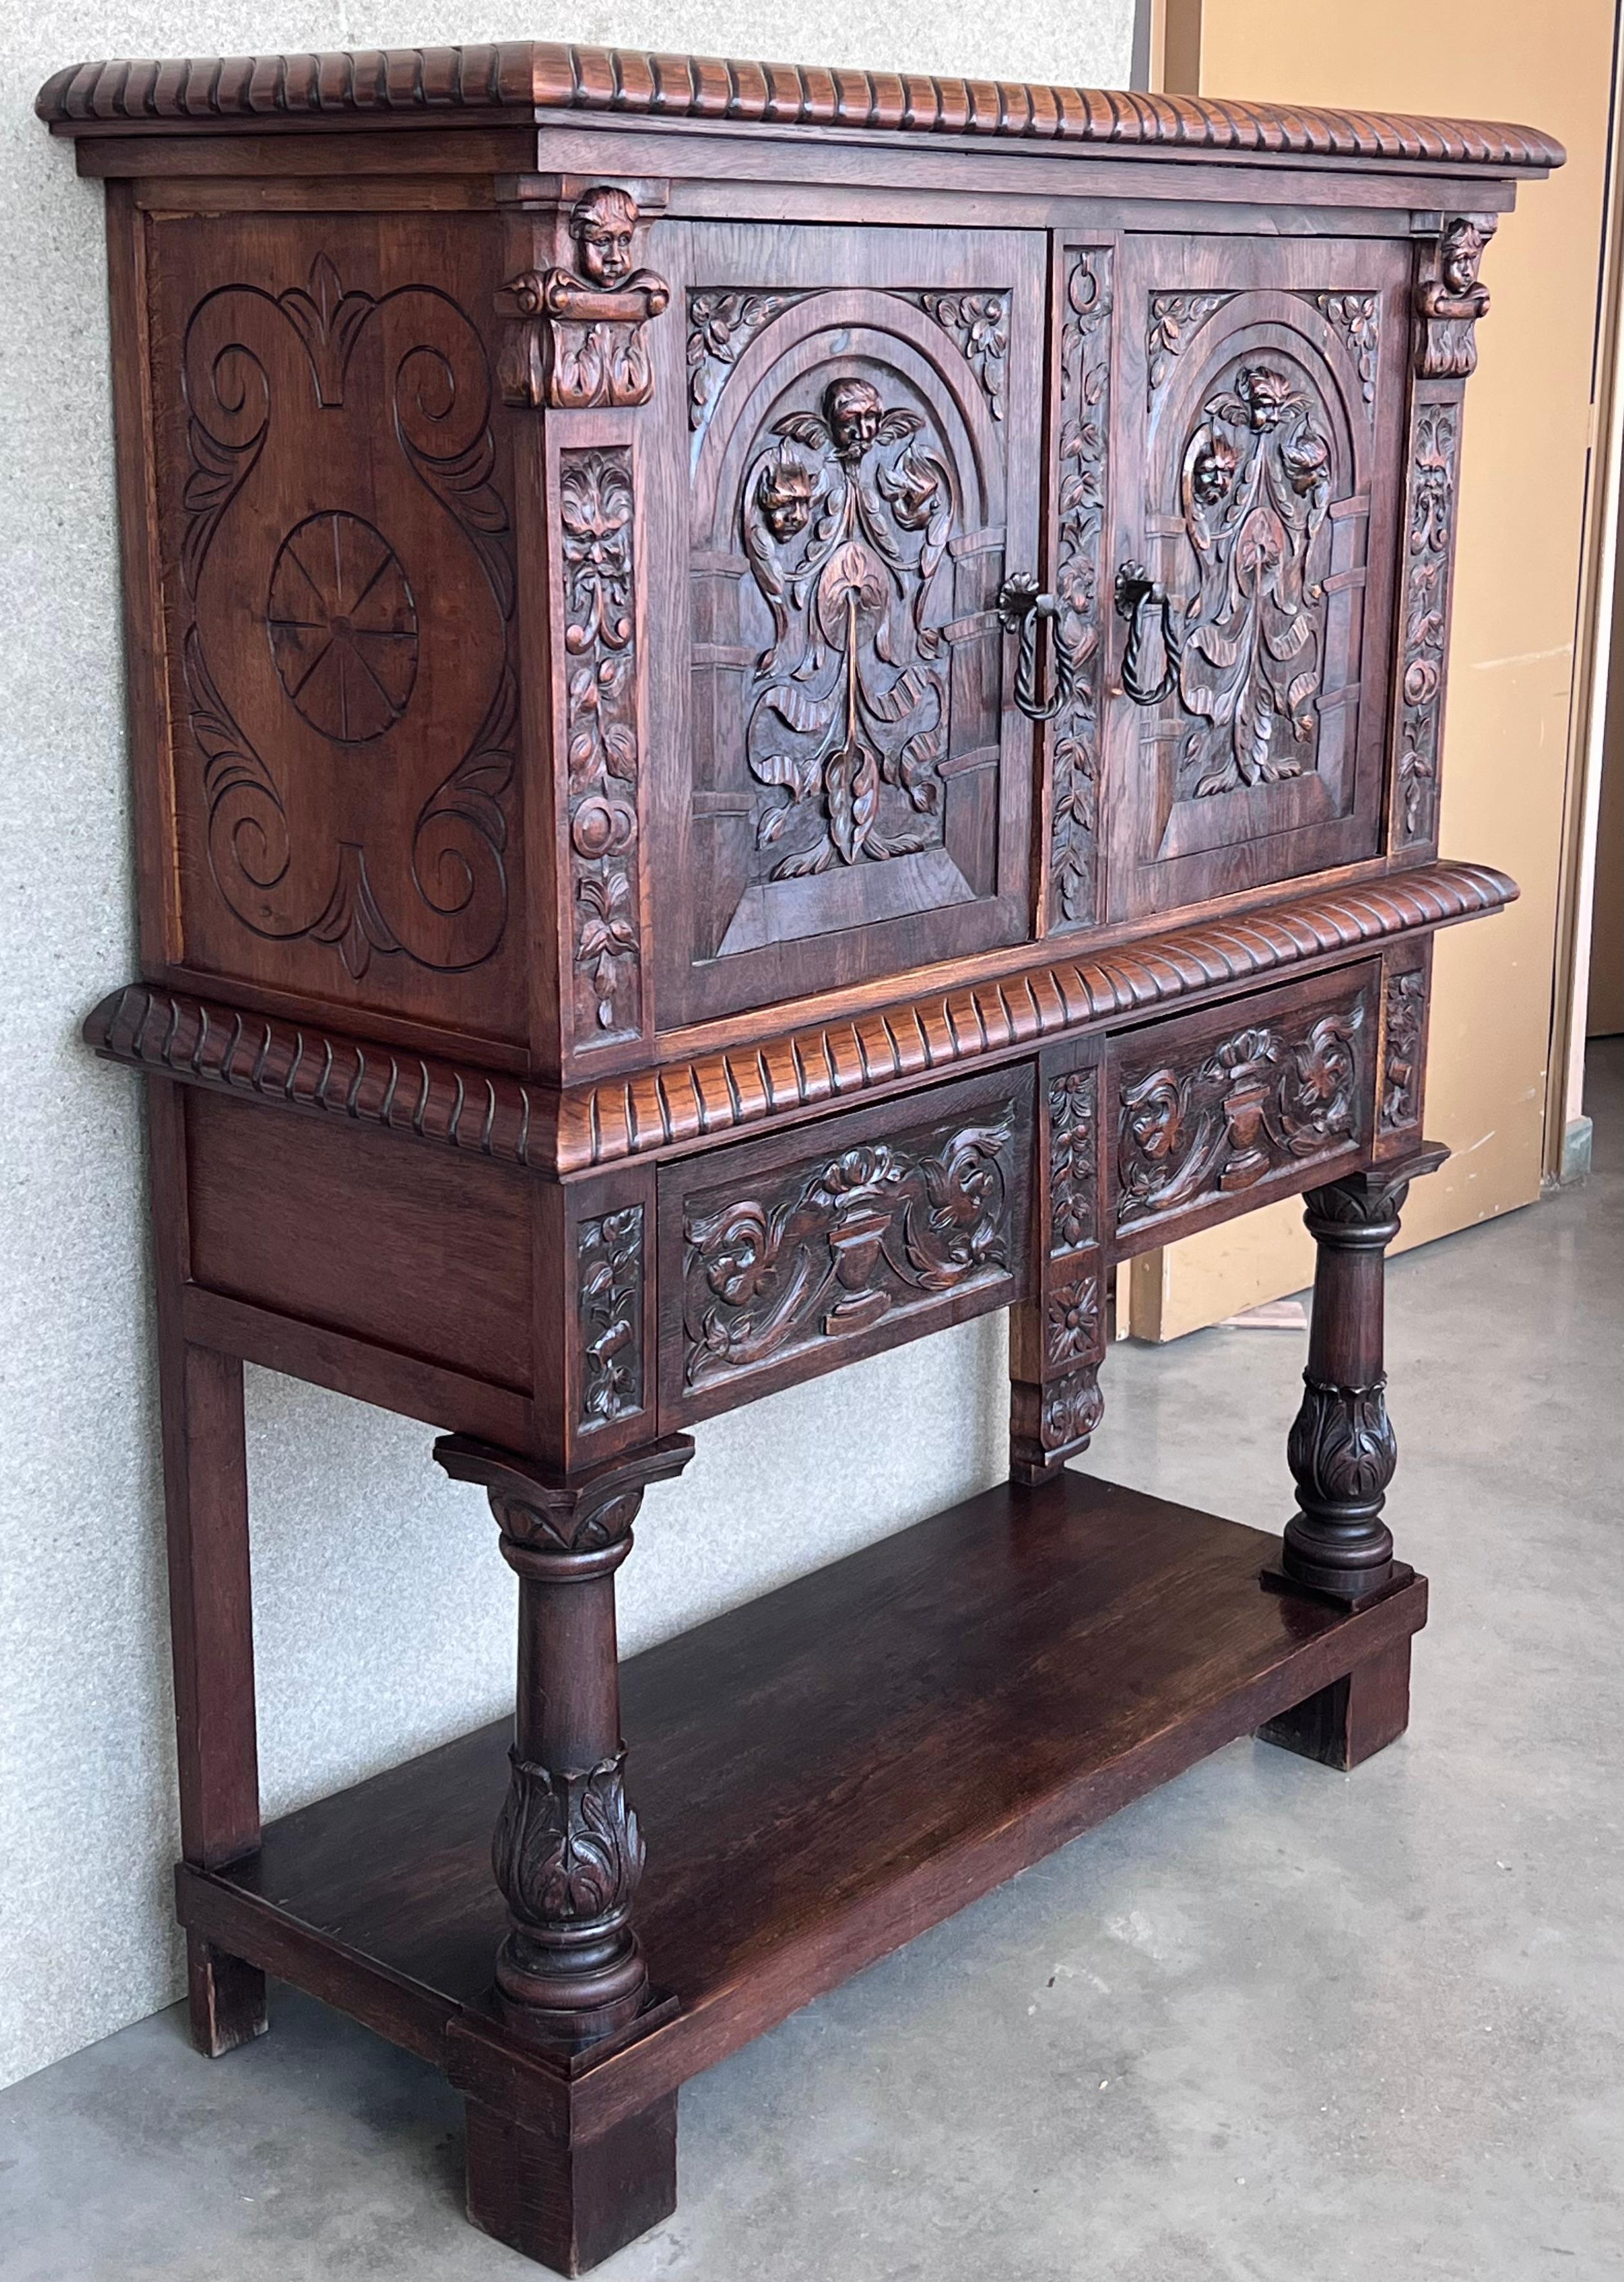 20th century Spanish hand carved Renaissance raised cabinet was rendered from dense, old-growth quarter sawn walnut, examples of which are on display in museums across Belgium and Holland that are over 1,000 years old! This stunning example features